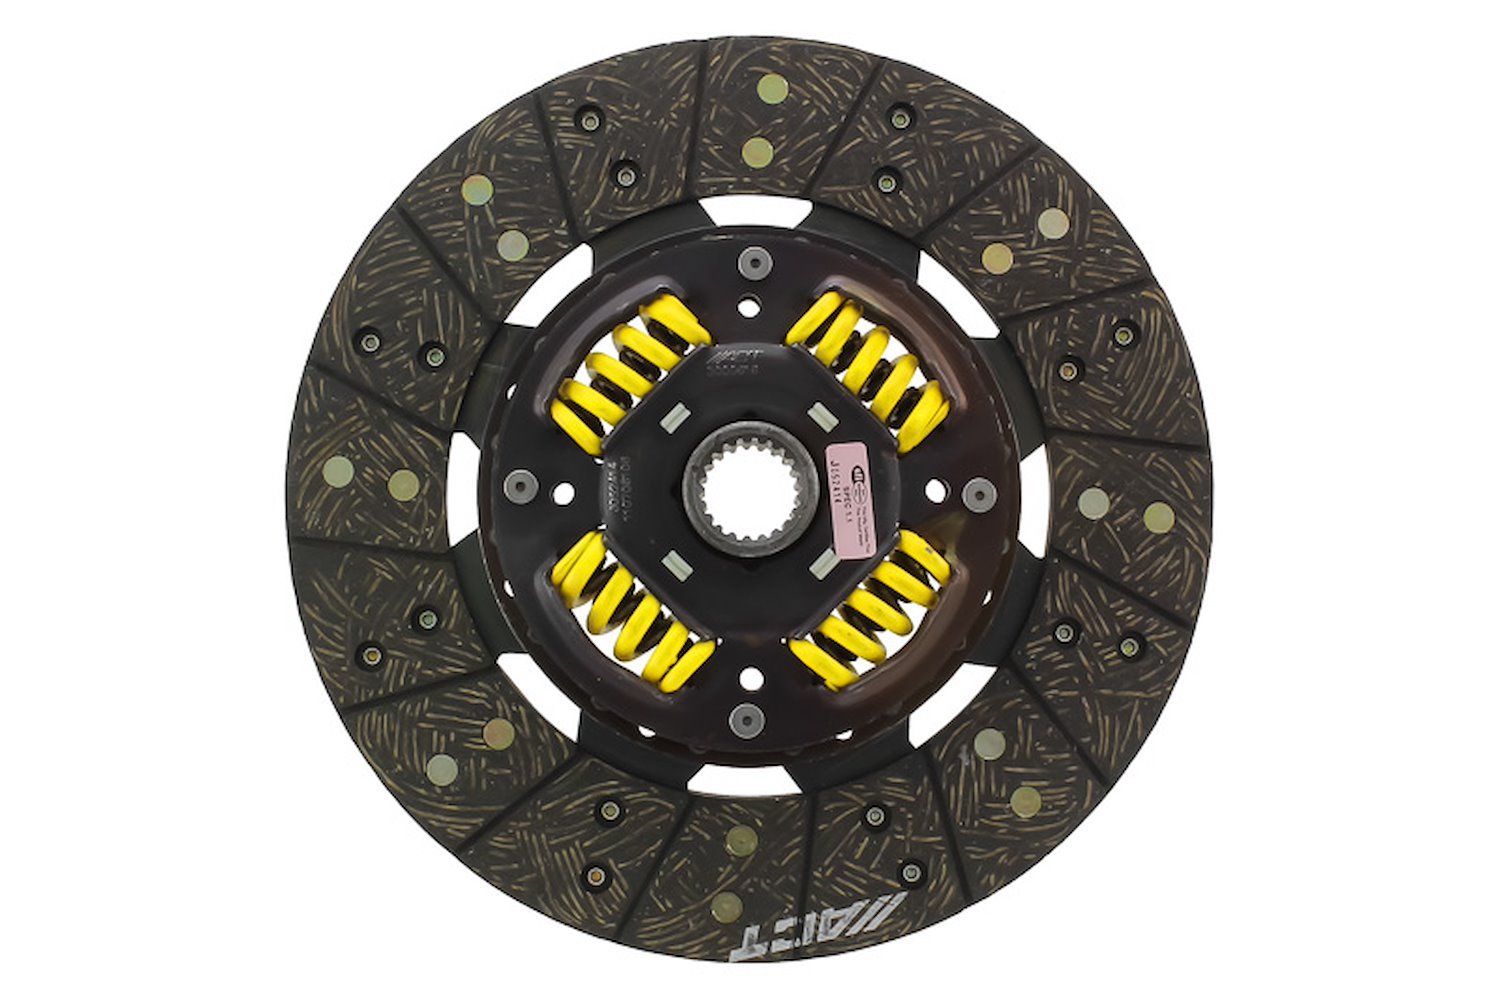 Performance Street Sprung Disc Transmission Clutch Friction Plate Fits Select Lexus/Scion/Toyota